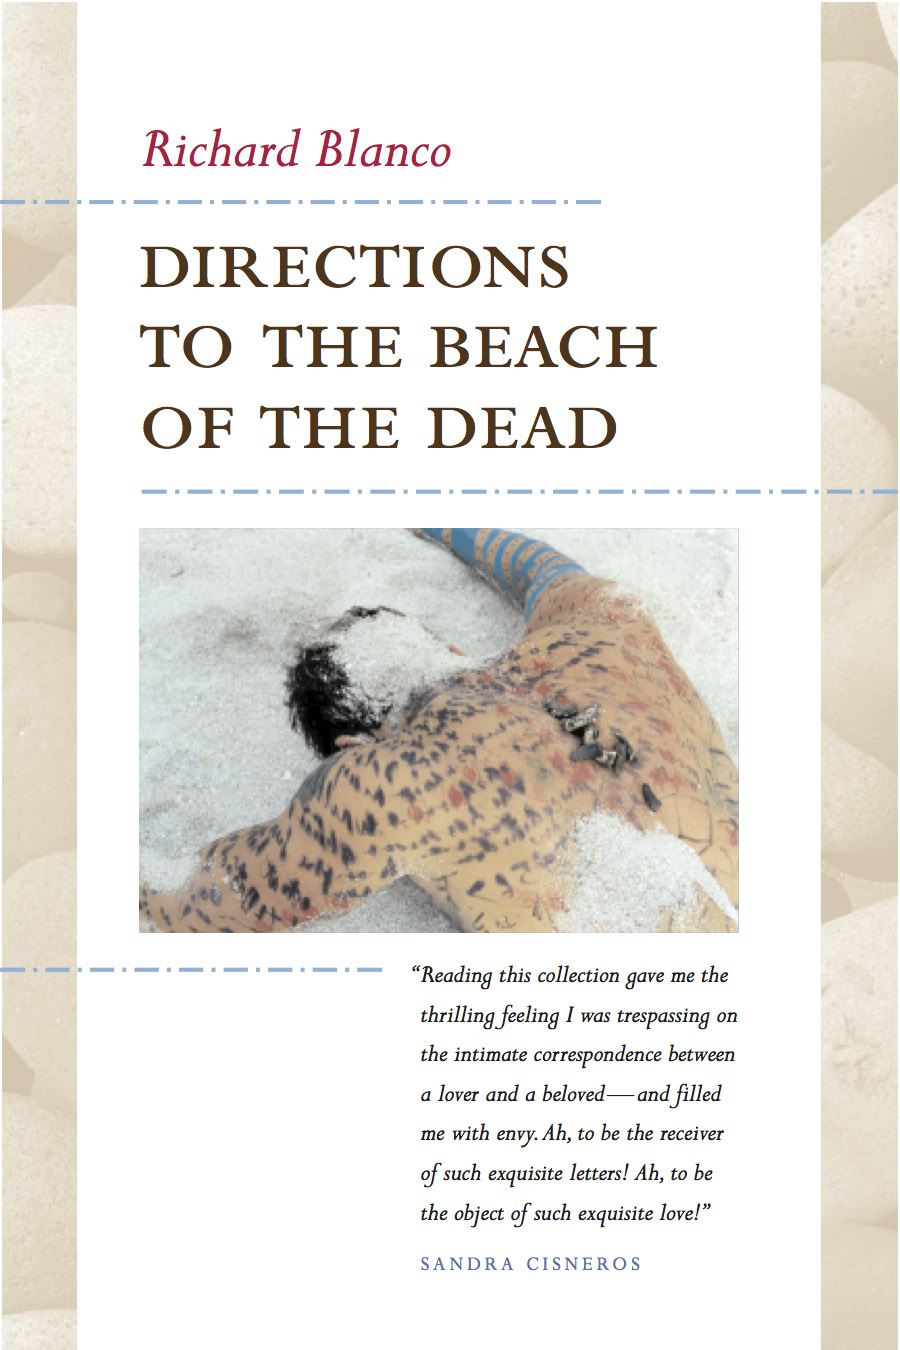 Directions to the Beach of the Dead by Richard Blanco